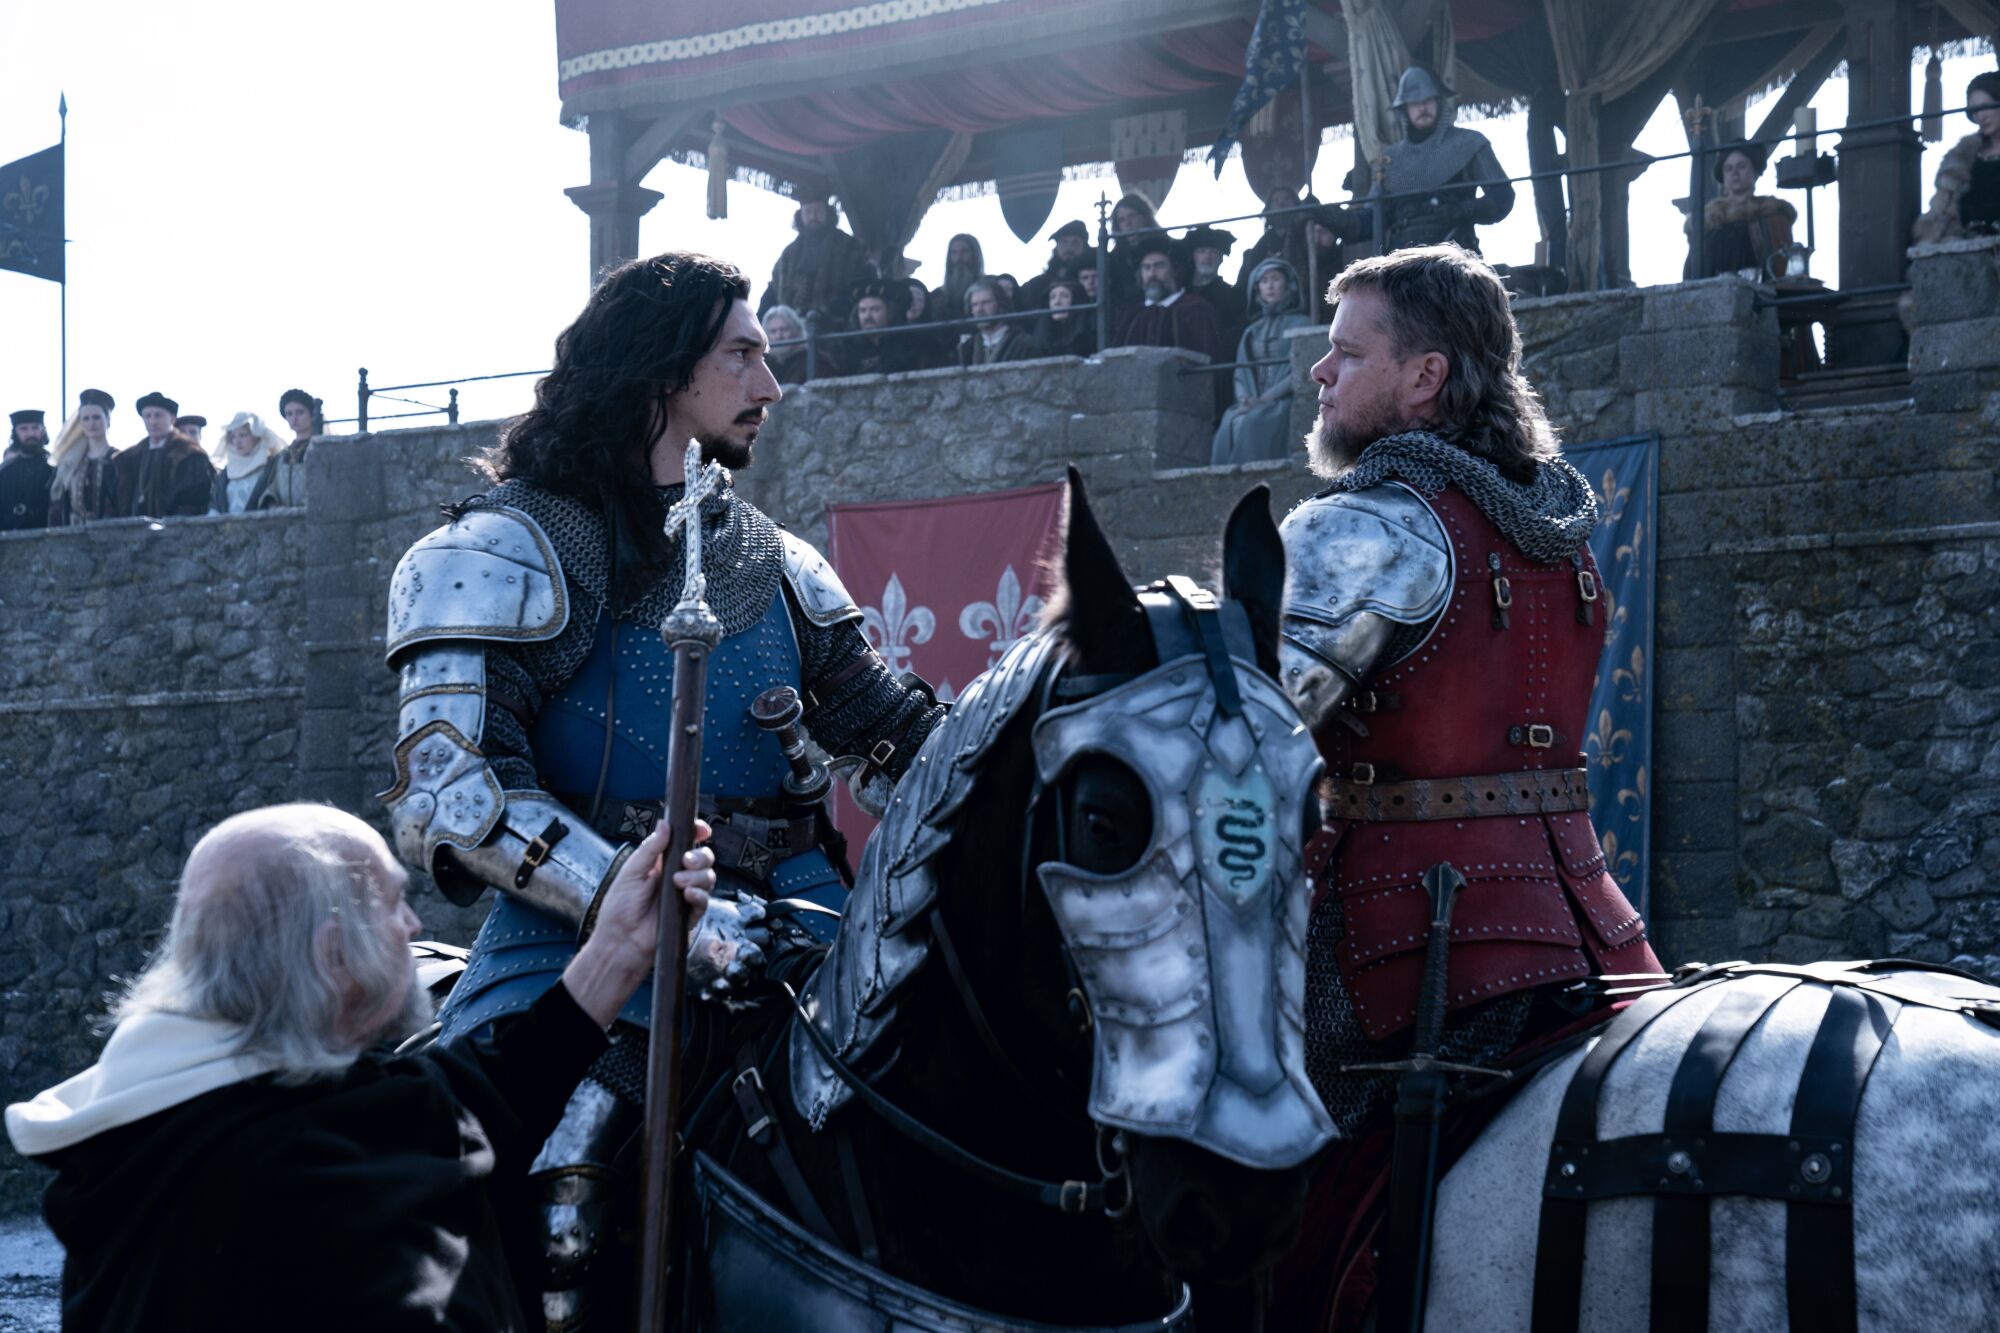 Adam Driver and Matt Damon wear the armor designed by Janty Yates in a scene from “The Last Duel.”